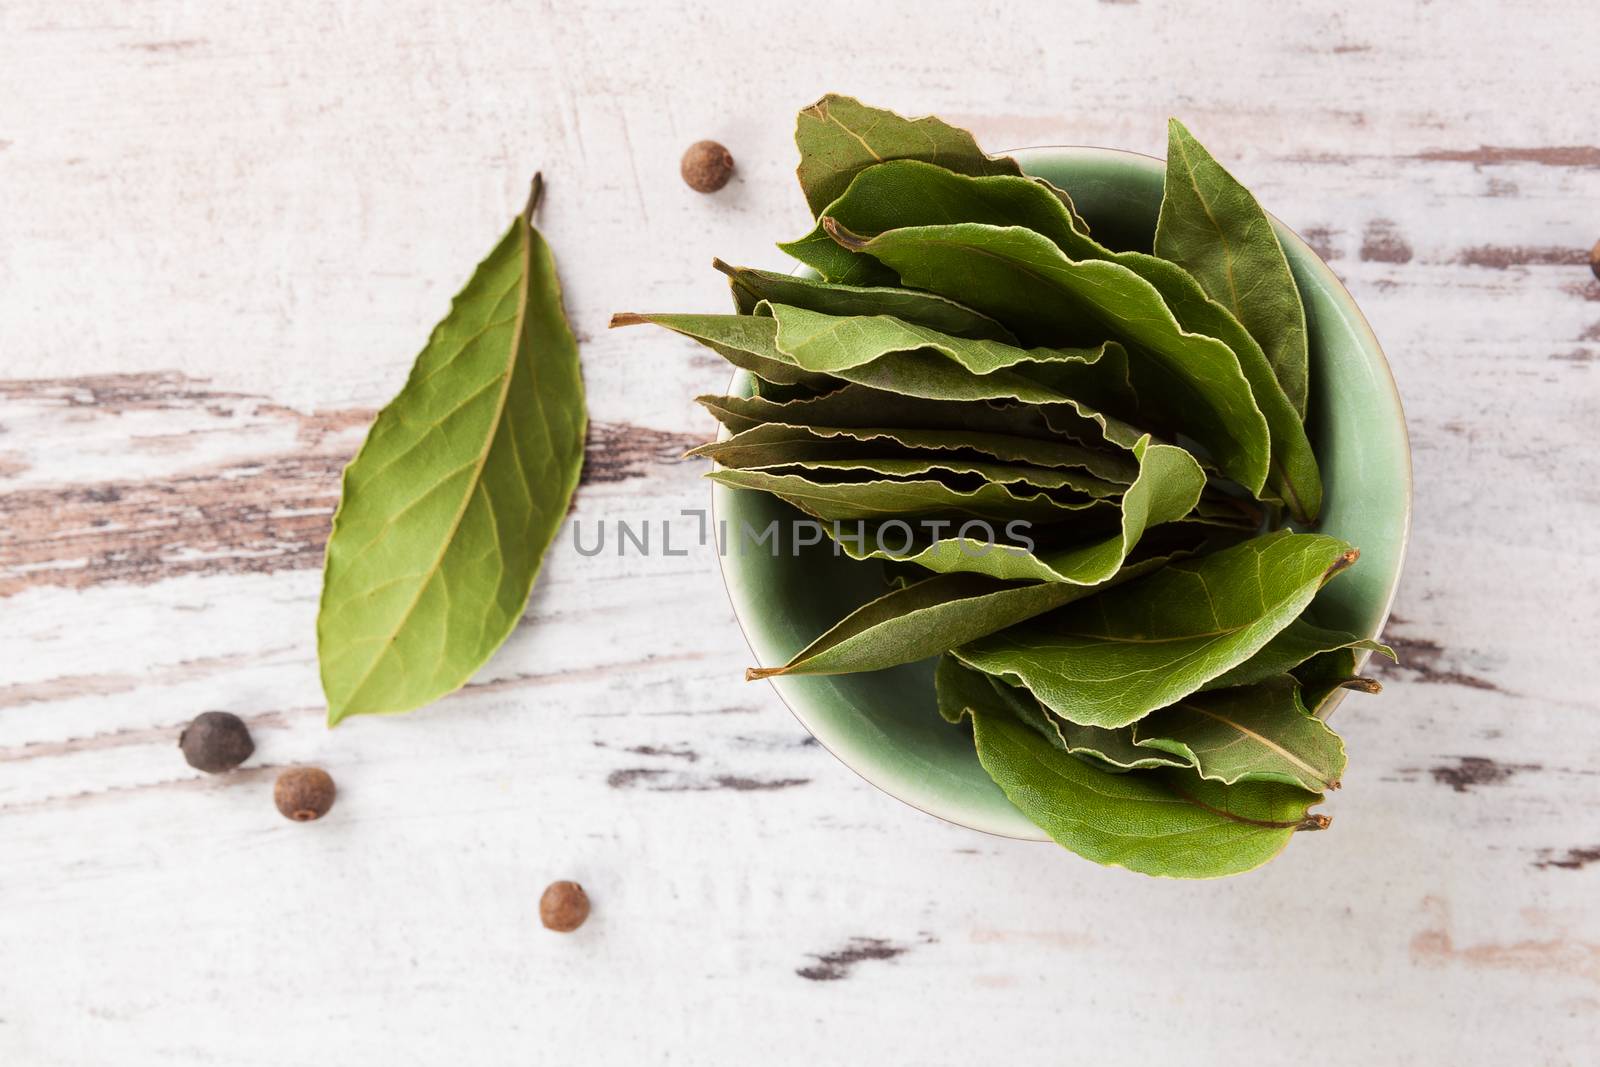 Dry bay leaves on white wooden textured background. Culinary herb, cooking ingredient and medical herb. 